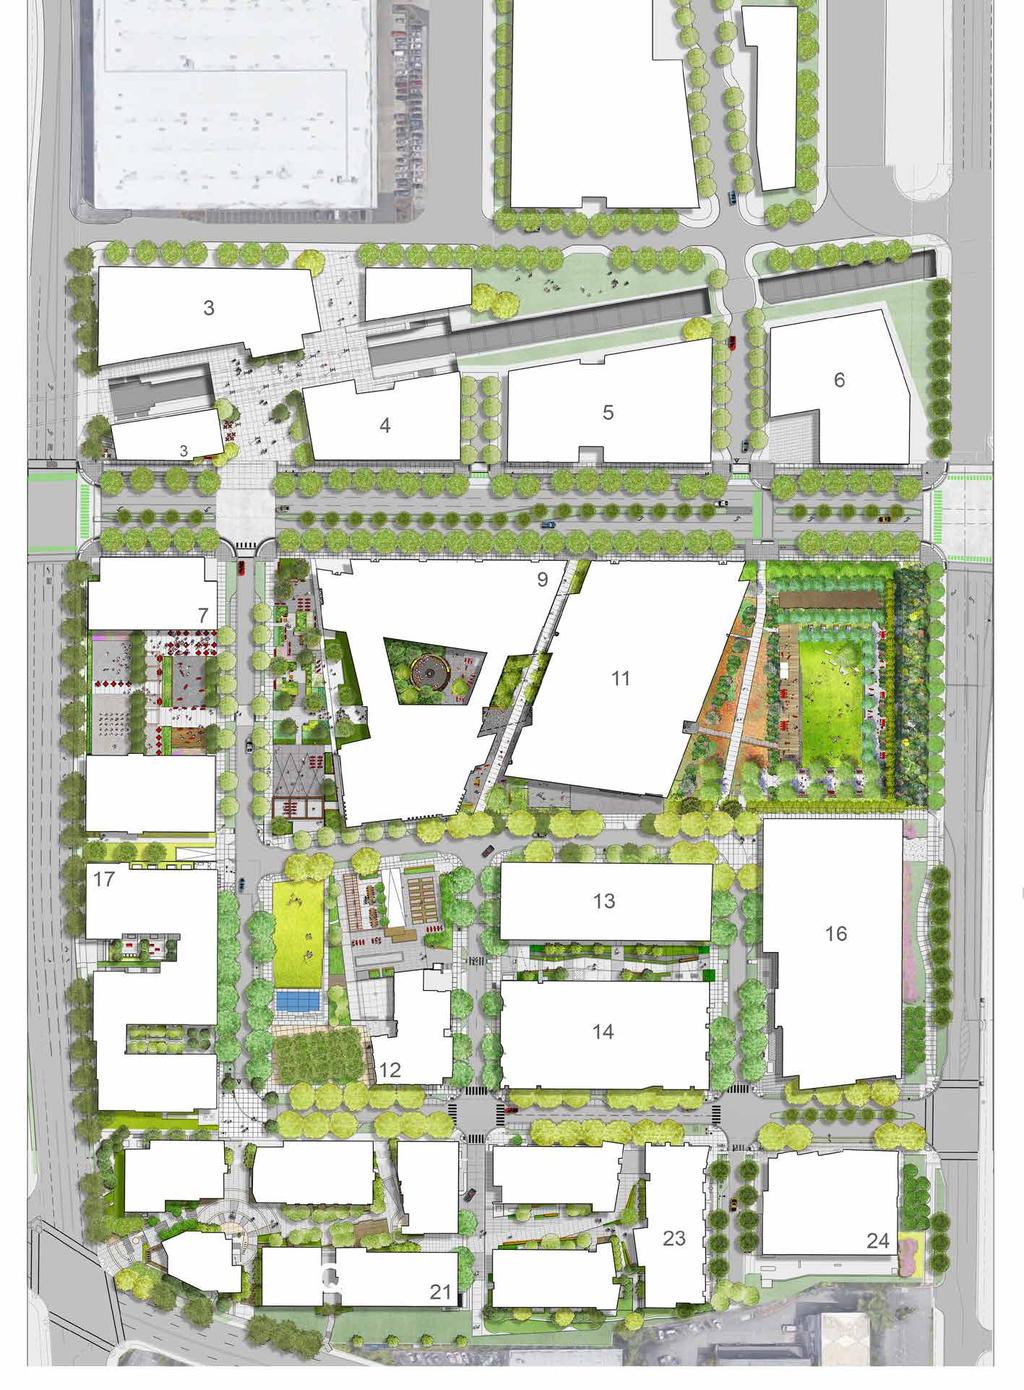 Proposed Spring District Retail Merchandising Plan COMPLETION 2017 2018 2019 2020 2021 2022 2023 PARKING STALLS TRANSIT STATION OPENS: 2023 FUTURE HOTEL SITE 682,000 SF FUTURE OFFICE 2,500 SF TRANSIT